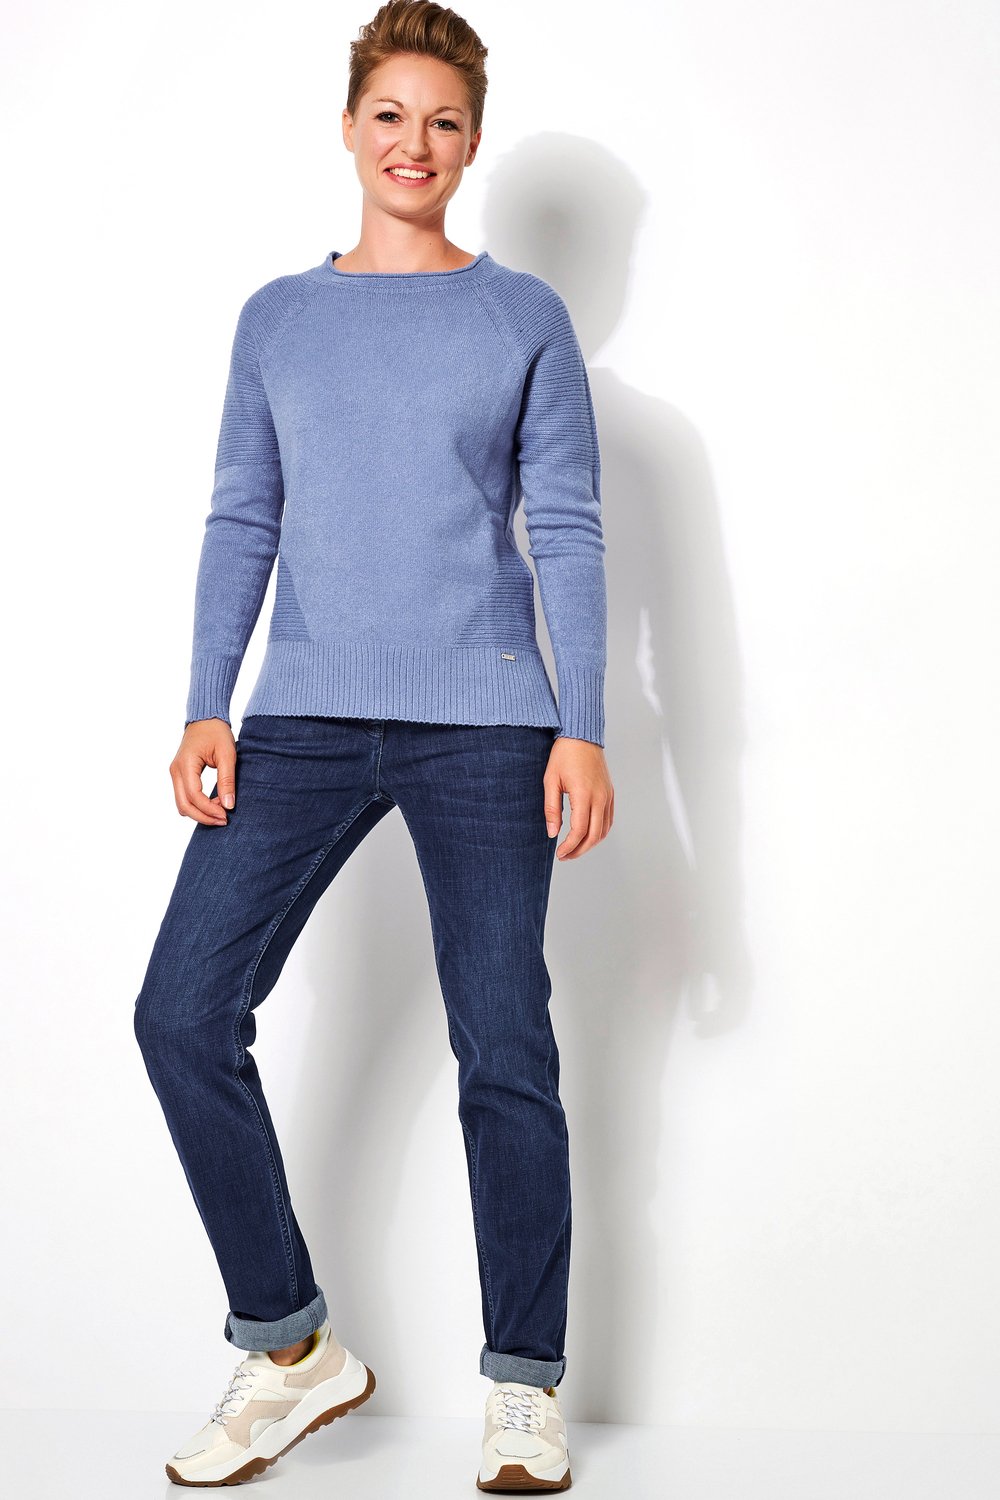 Authentische Shapingjeans | Style »Perfect Shape« mid blue used